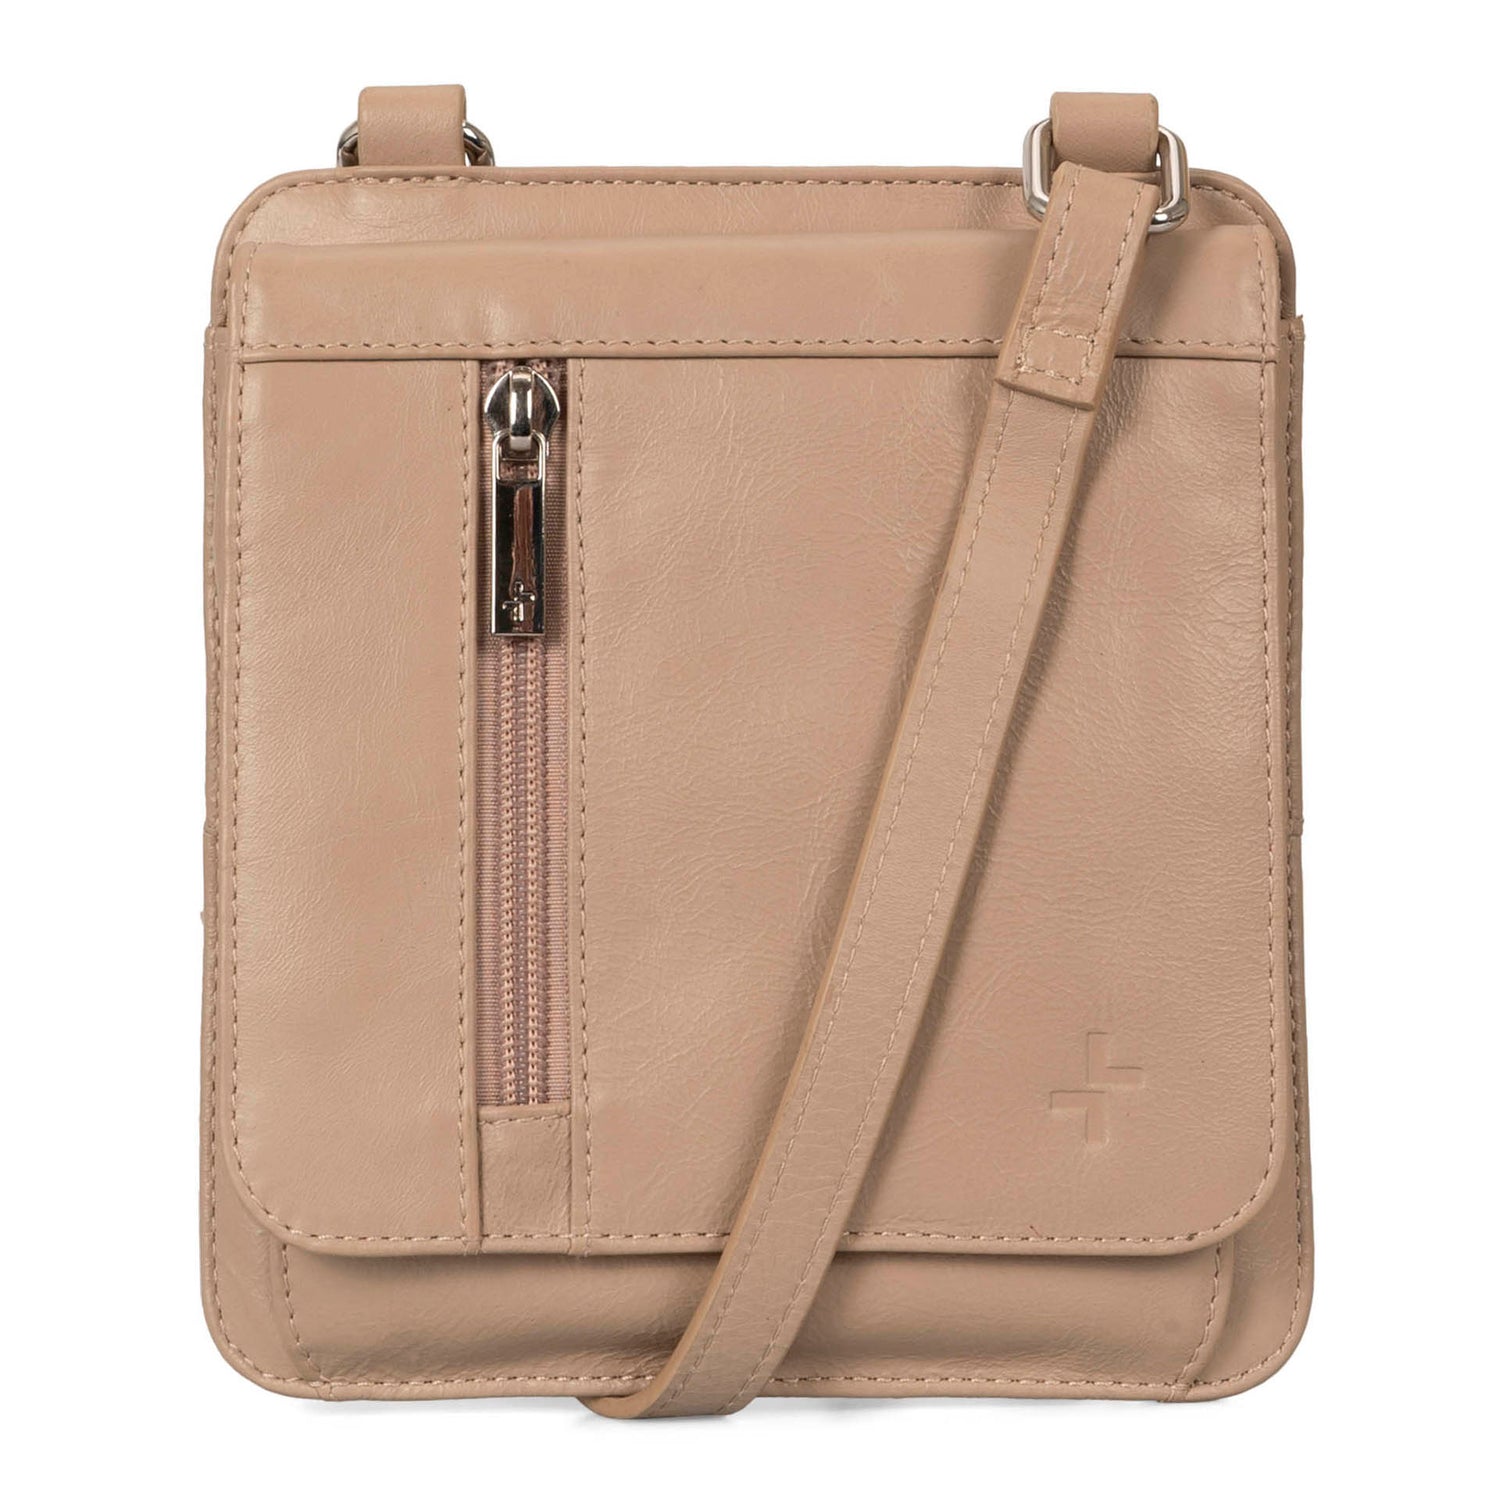 Front view of a beige slim crossobdy bag called Basics designed by Tracker showing its supple leather, crossbody strap, and exterior zipper pocket.